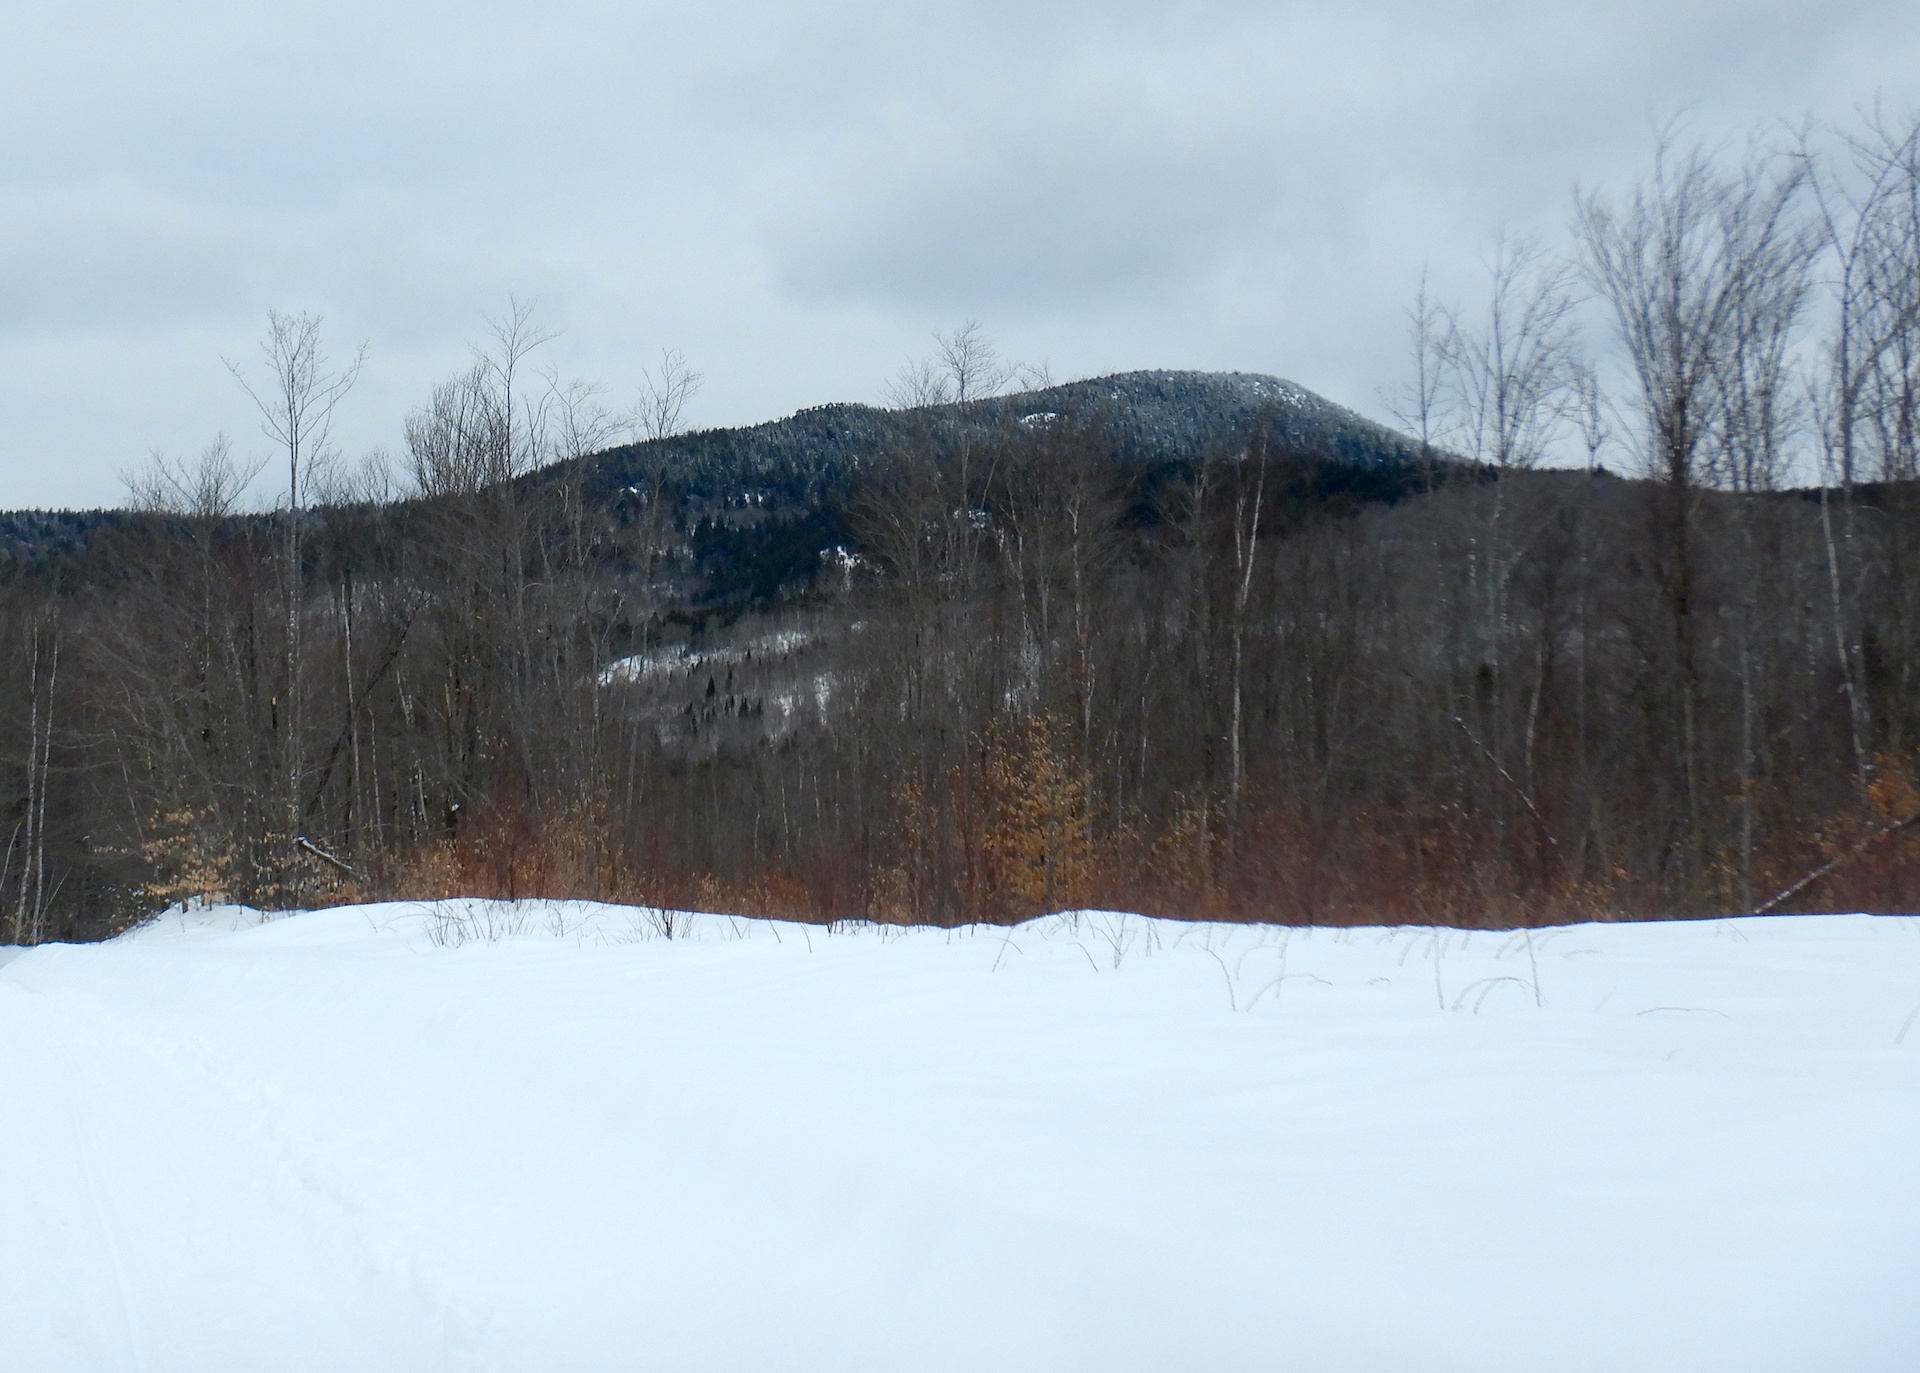 View of mountain from a low elevation. The mountain is covered in trees that transition from deciduous to coniferous from low to high. The foreground is snow covered.